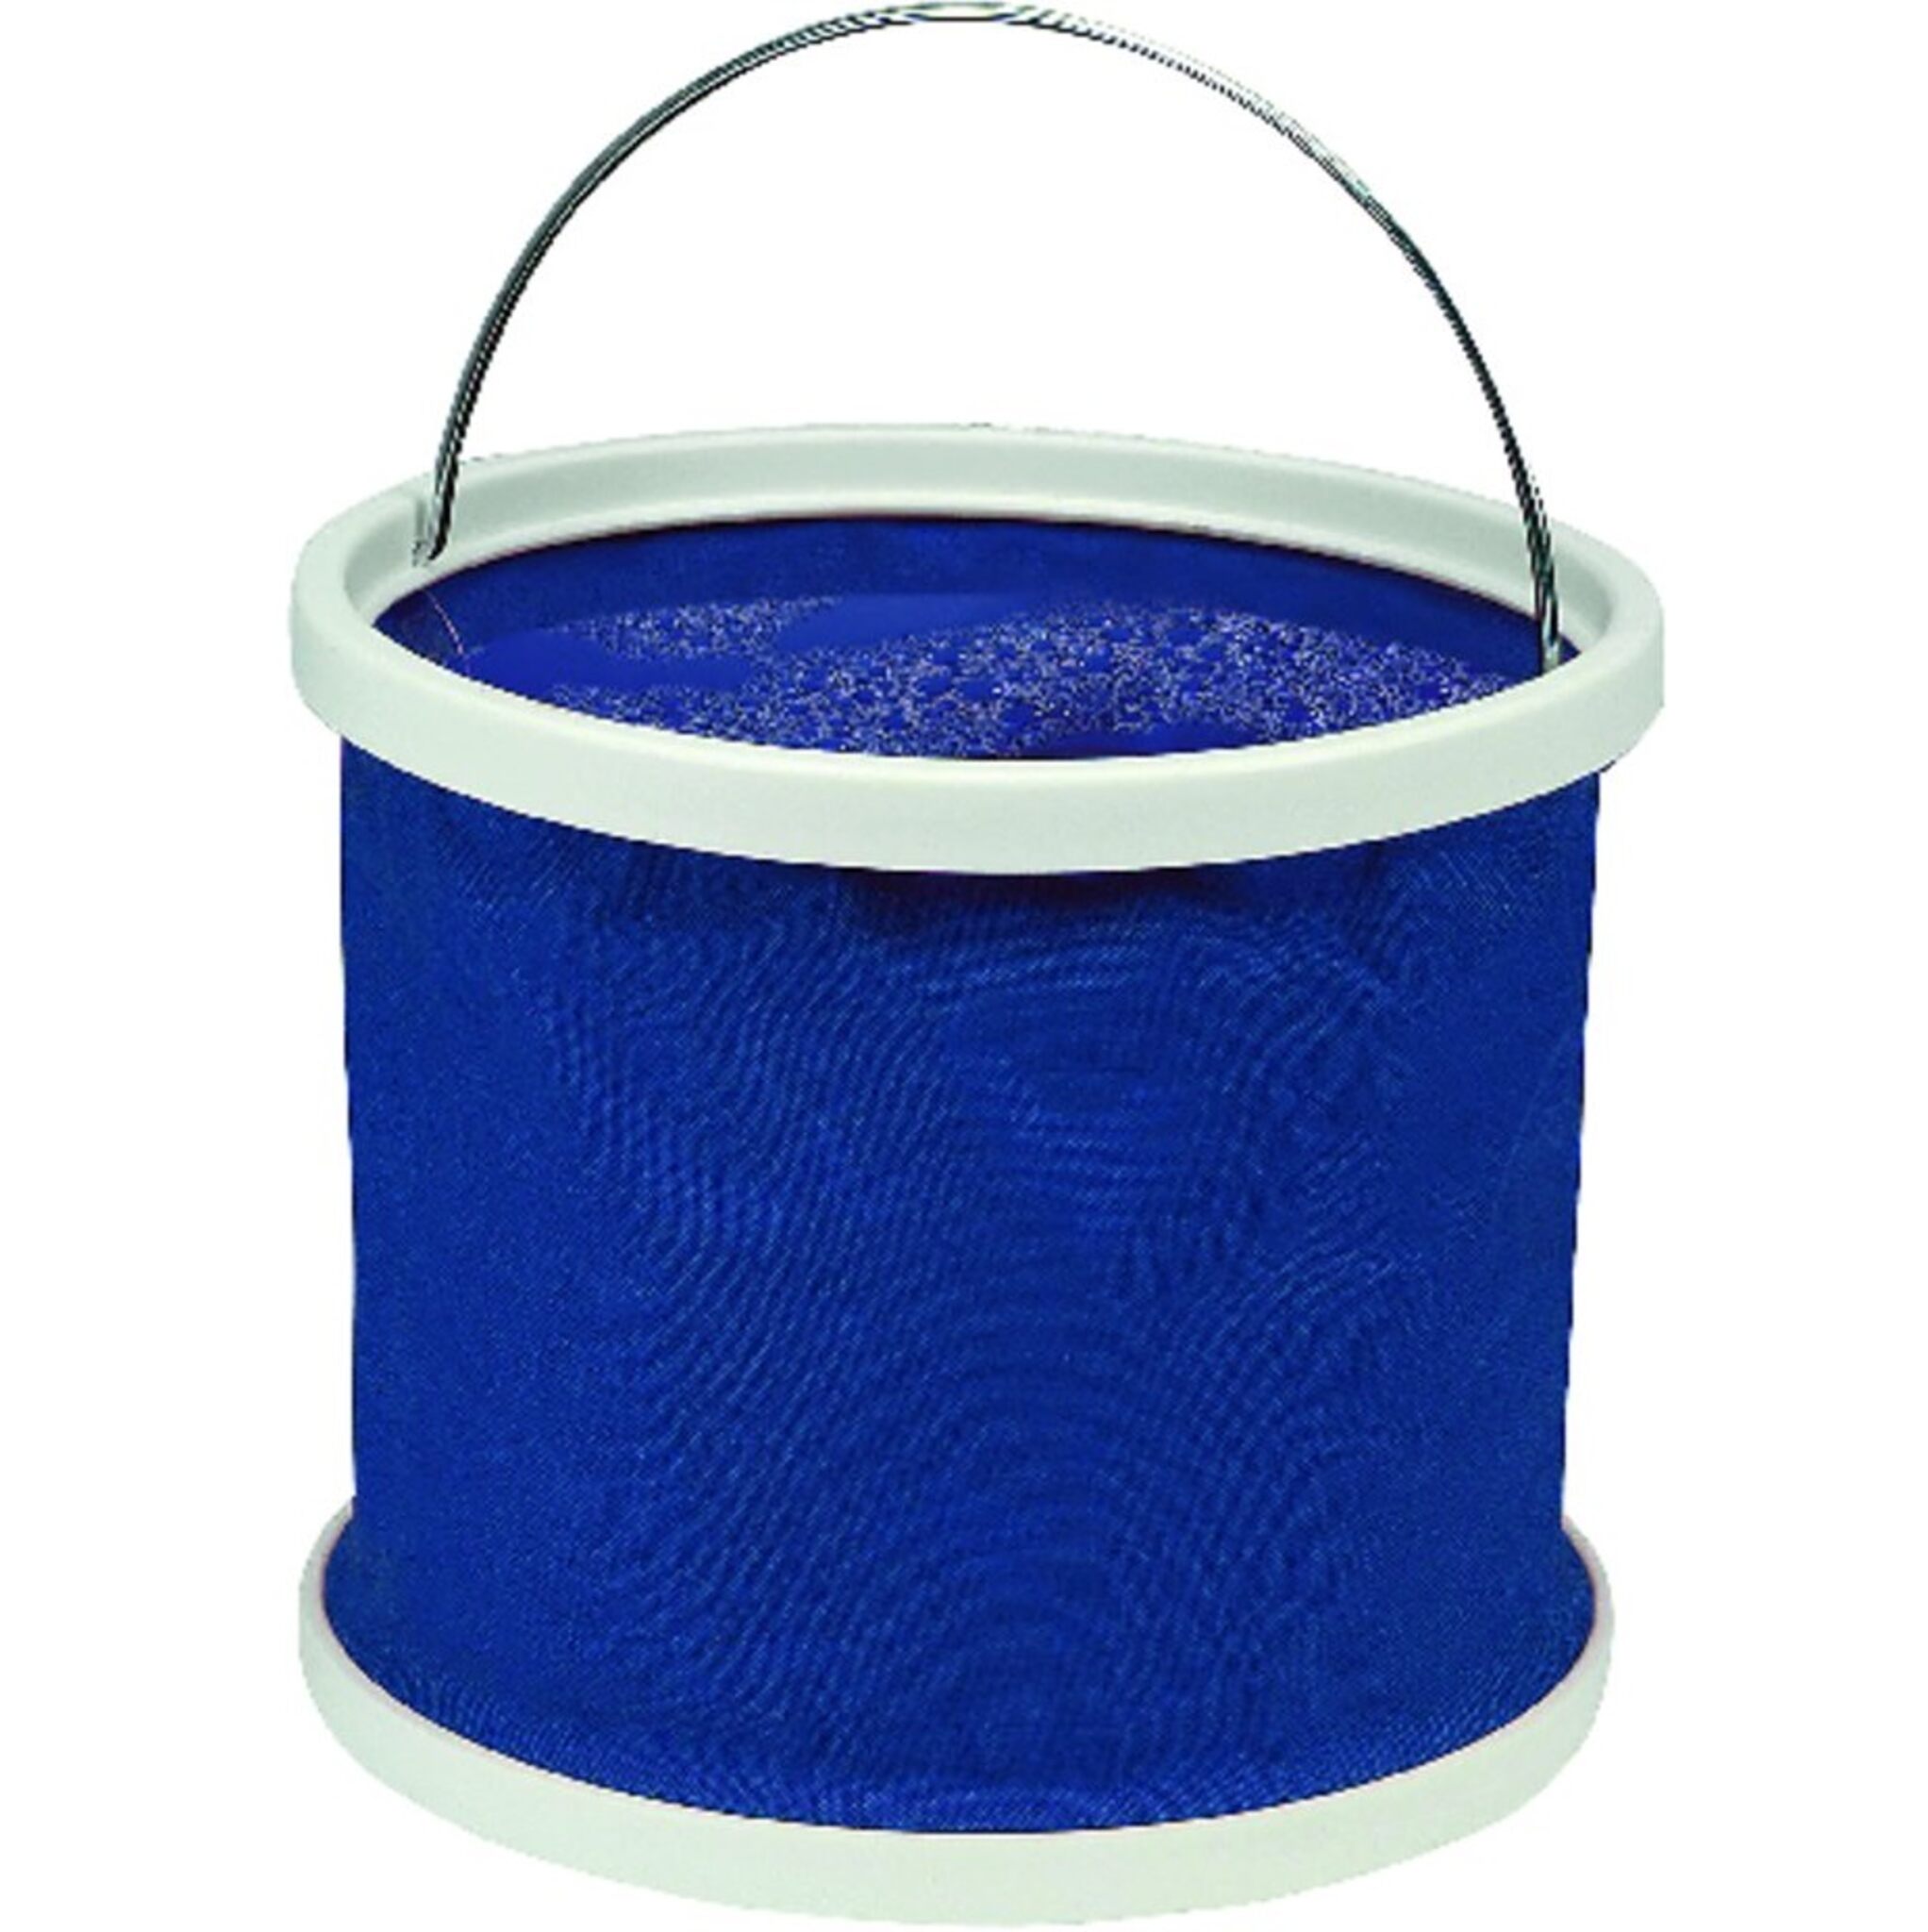 Yachticon Foldable PVC Bucket, 9 liters